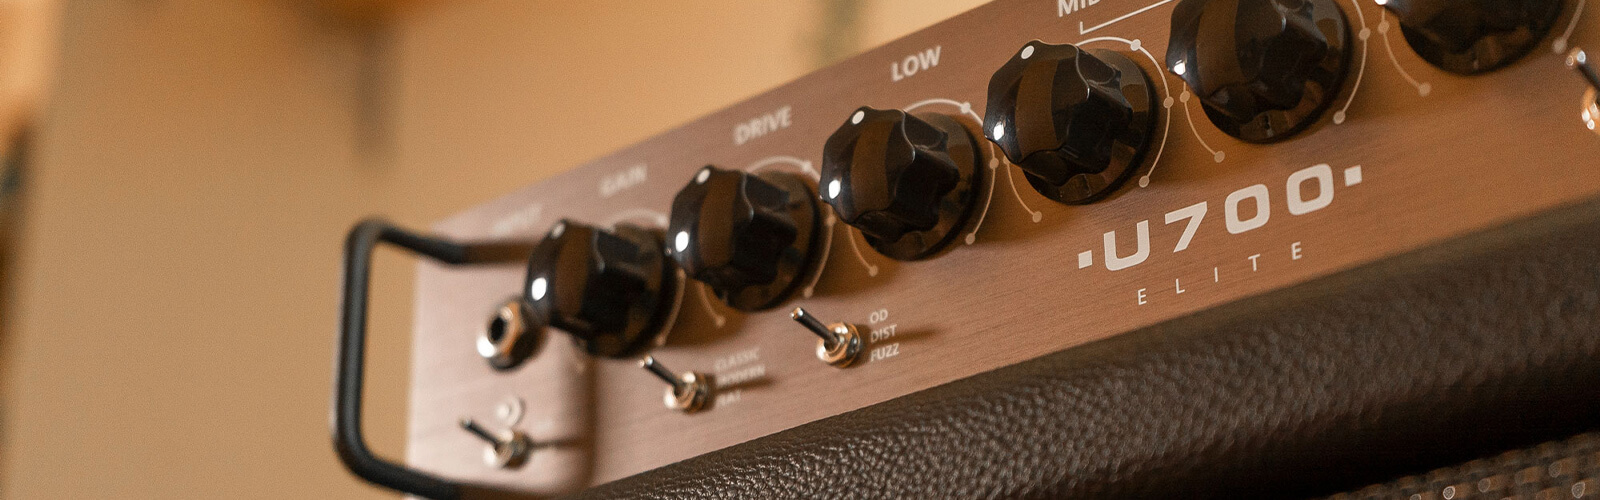 angled closeup view of a control panel on Unity Elite 700H guitar amp